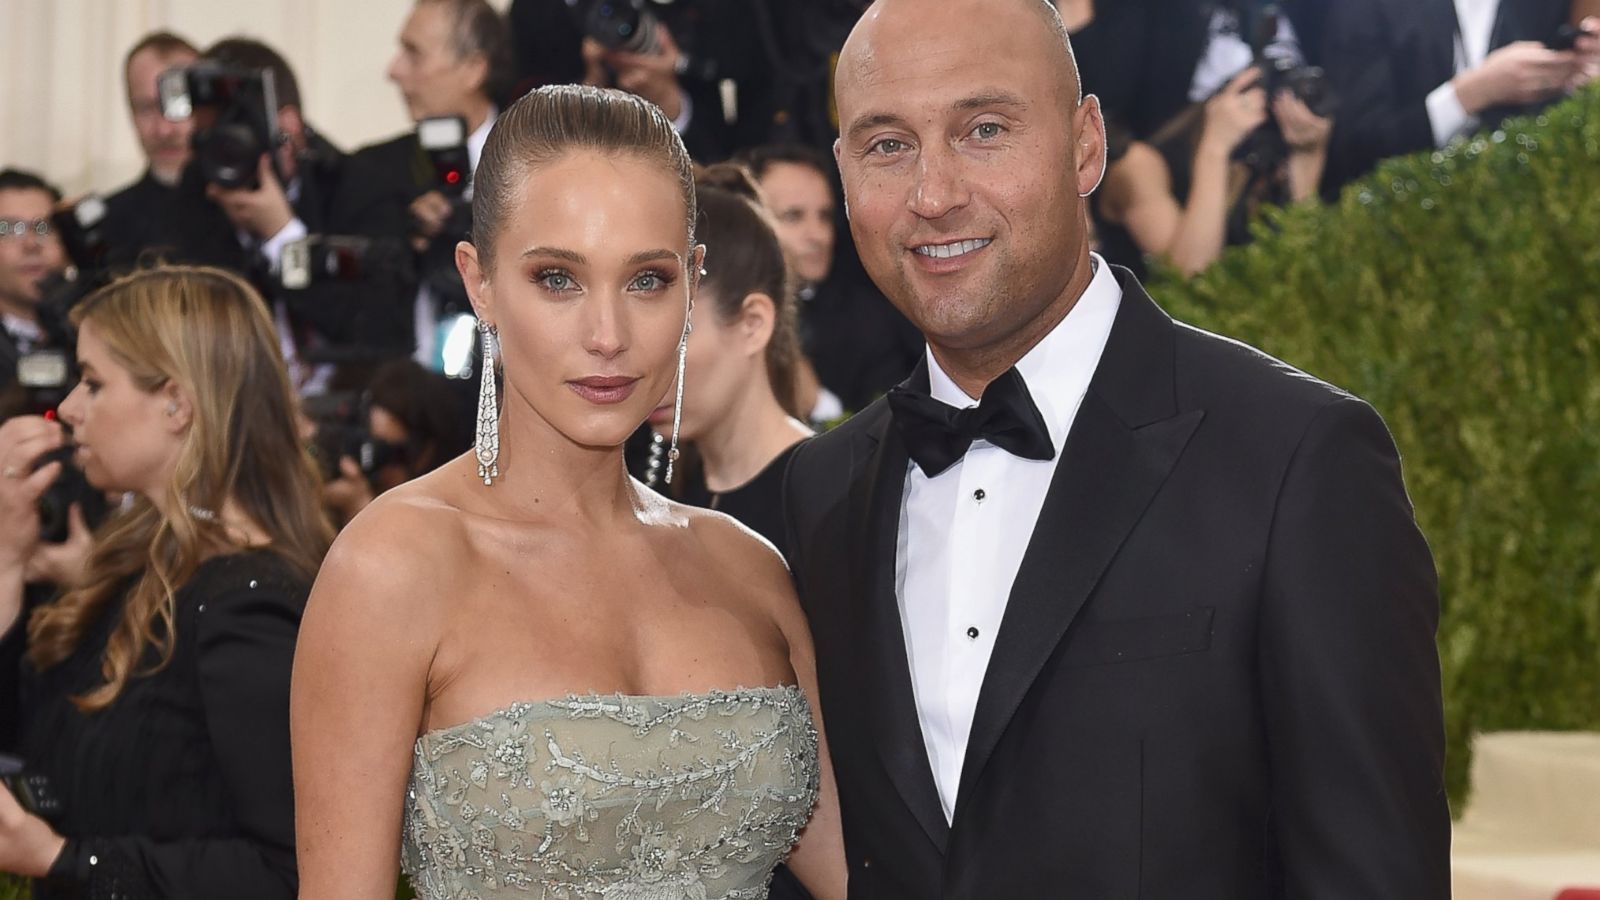 Derek Jeter and wife Hannah expecting first child 